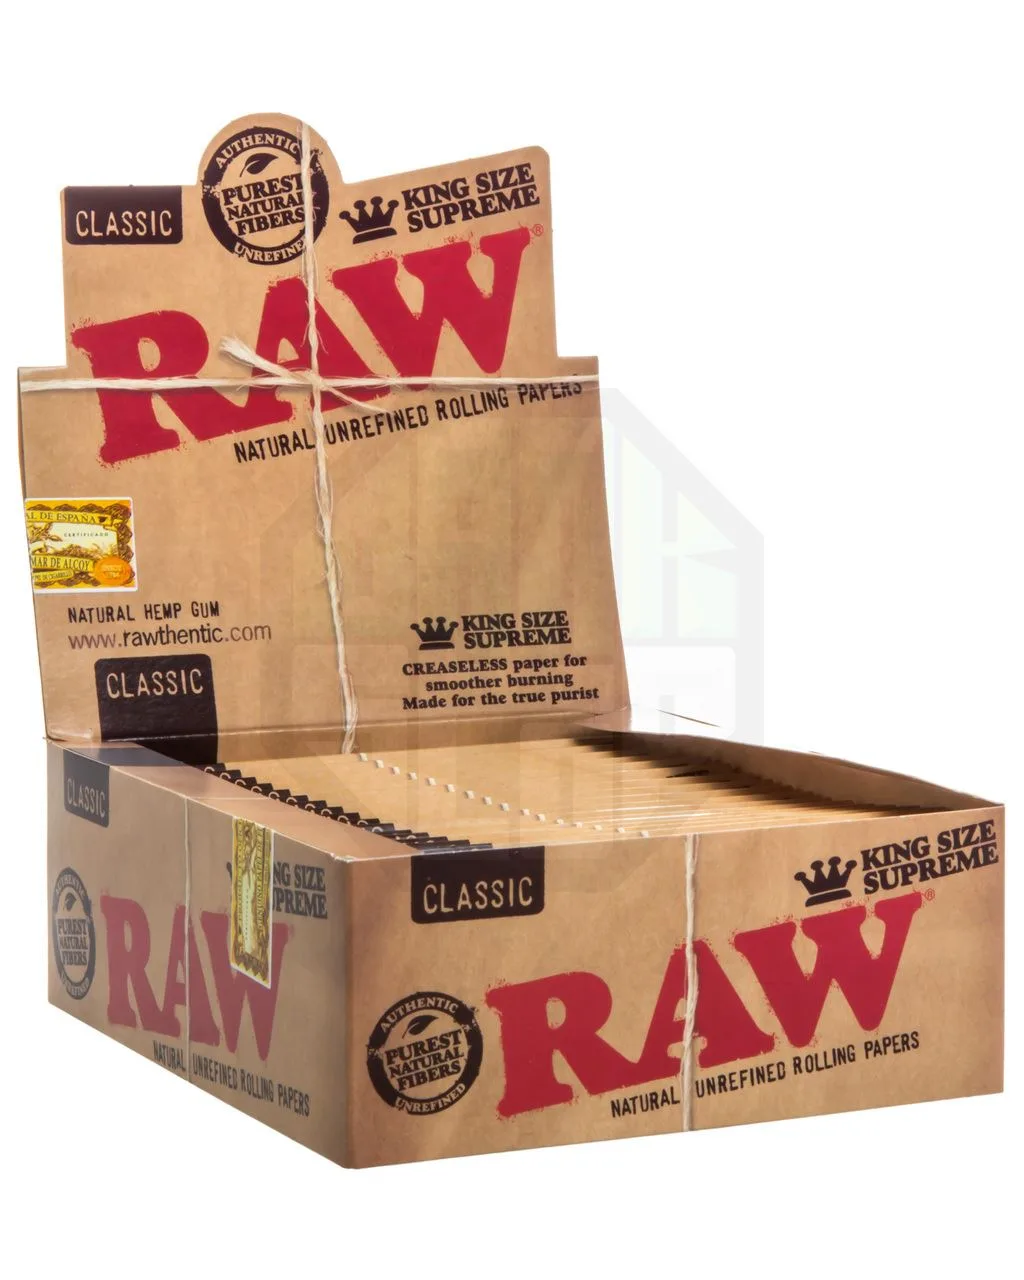 RAW classic king size supreme 24 packs